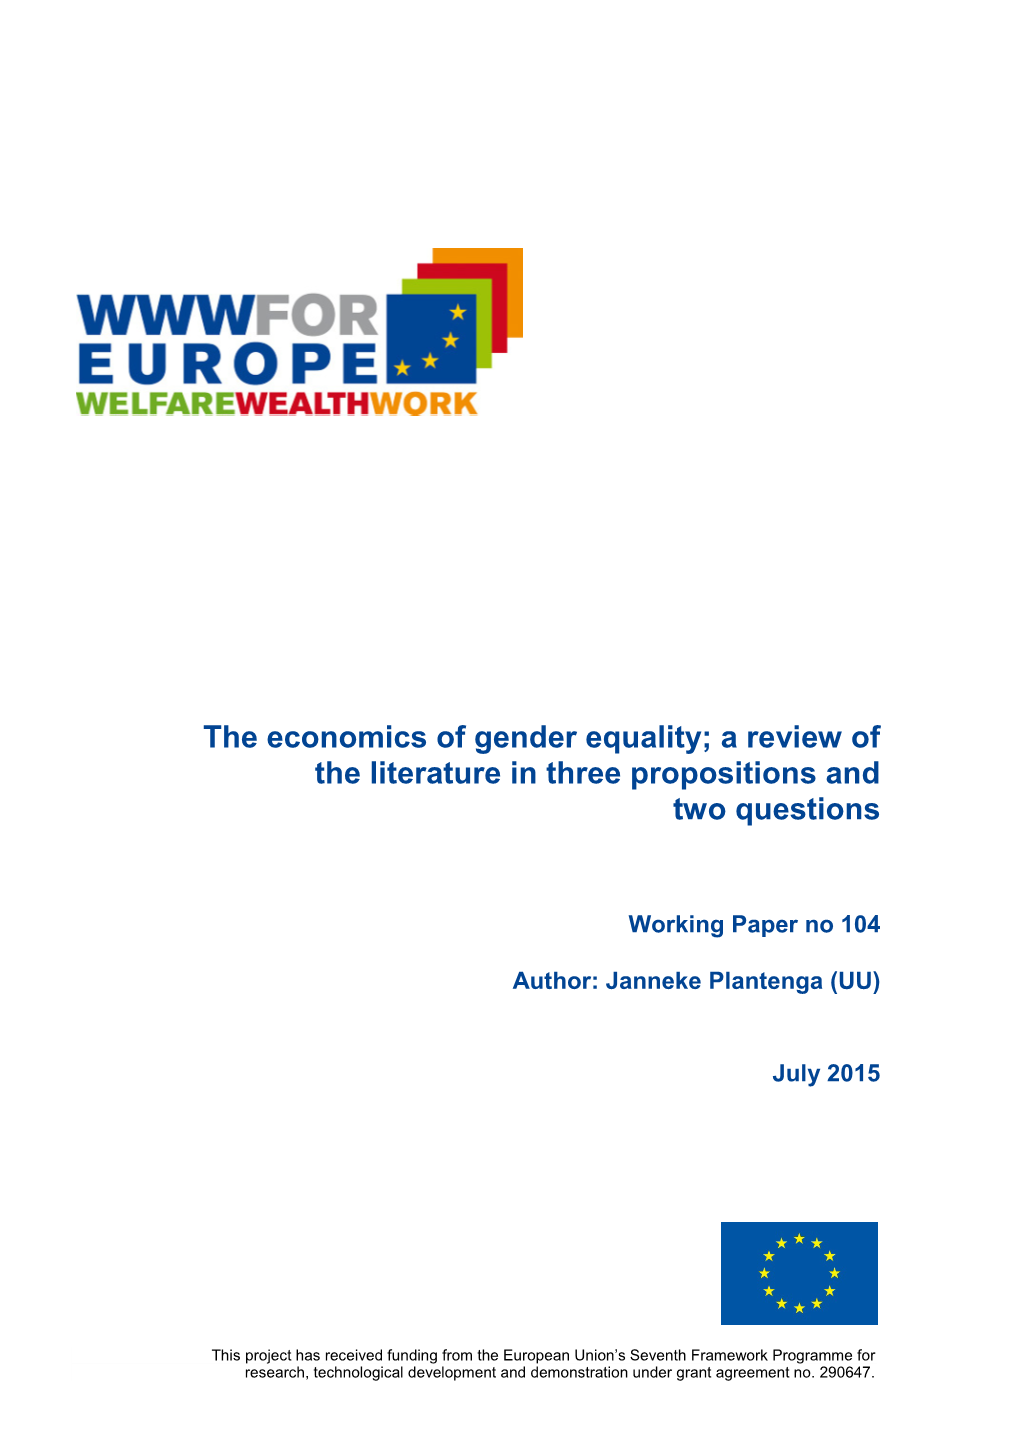 The Economics of Gender Equality; a Review of the Literature in Three Propositions and Two Questions